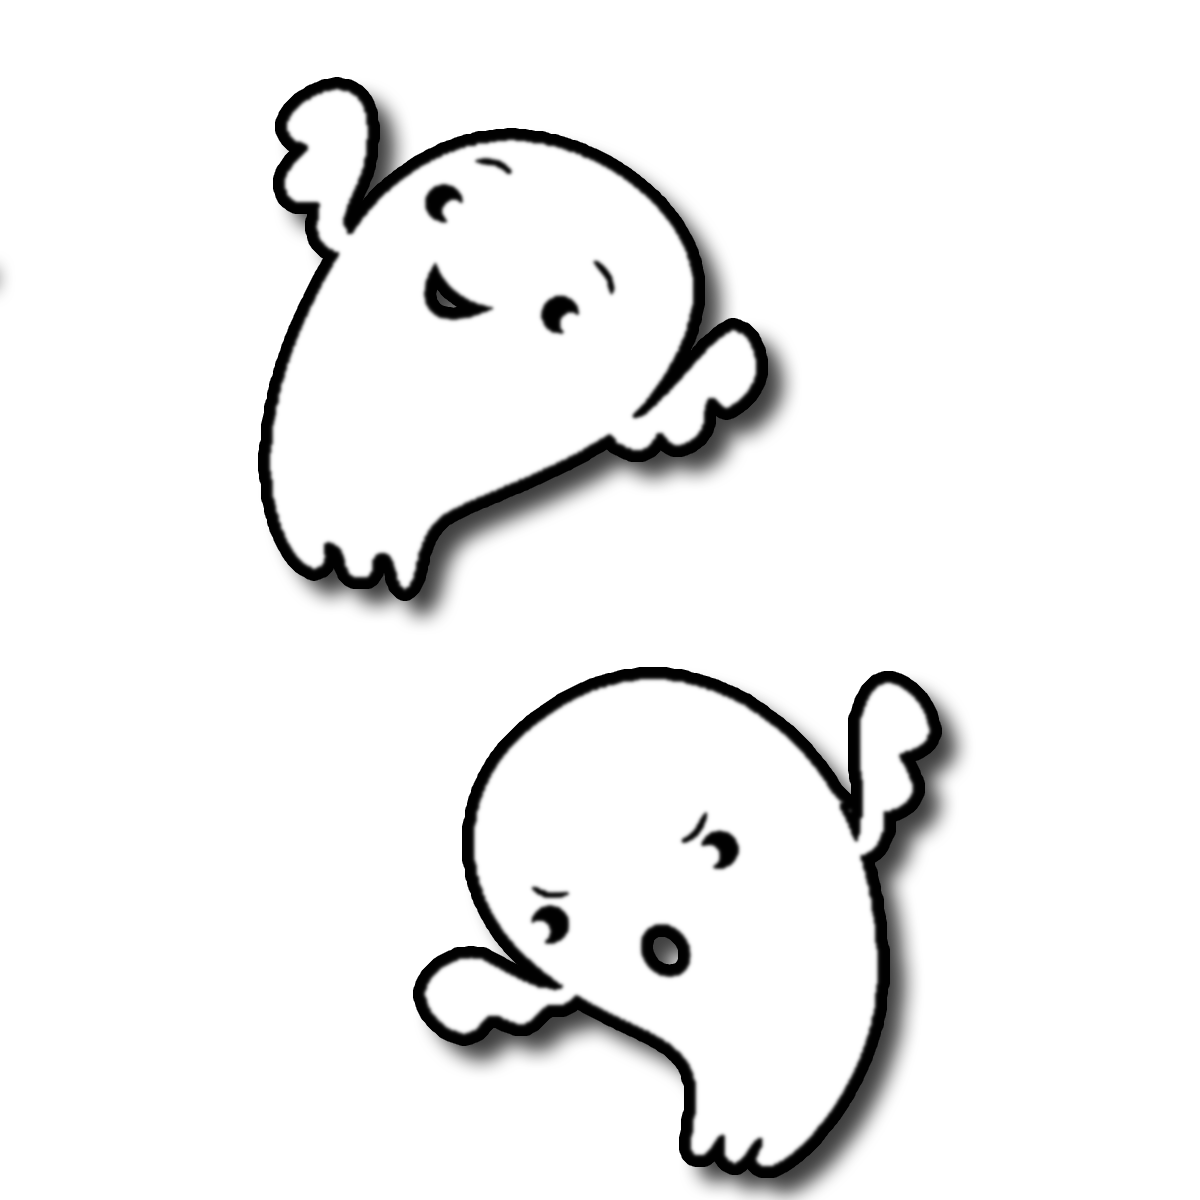 free halloween clipart ghost - photo #49